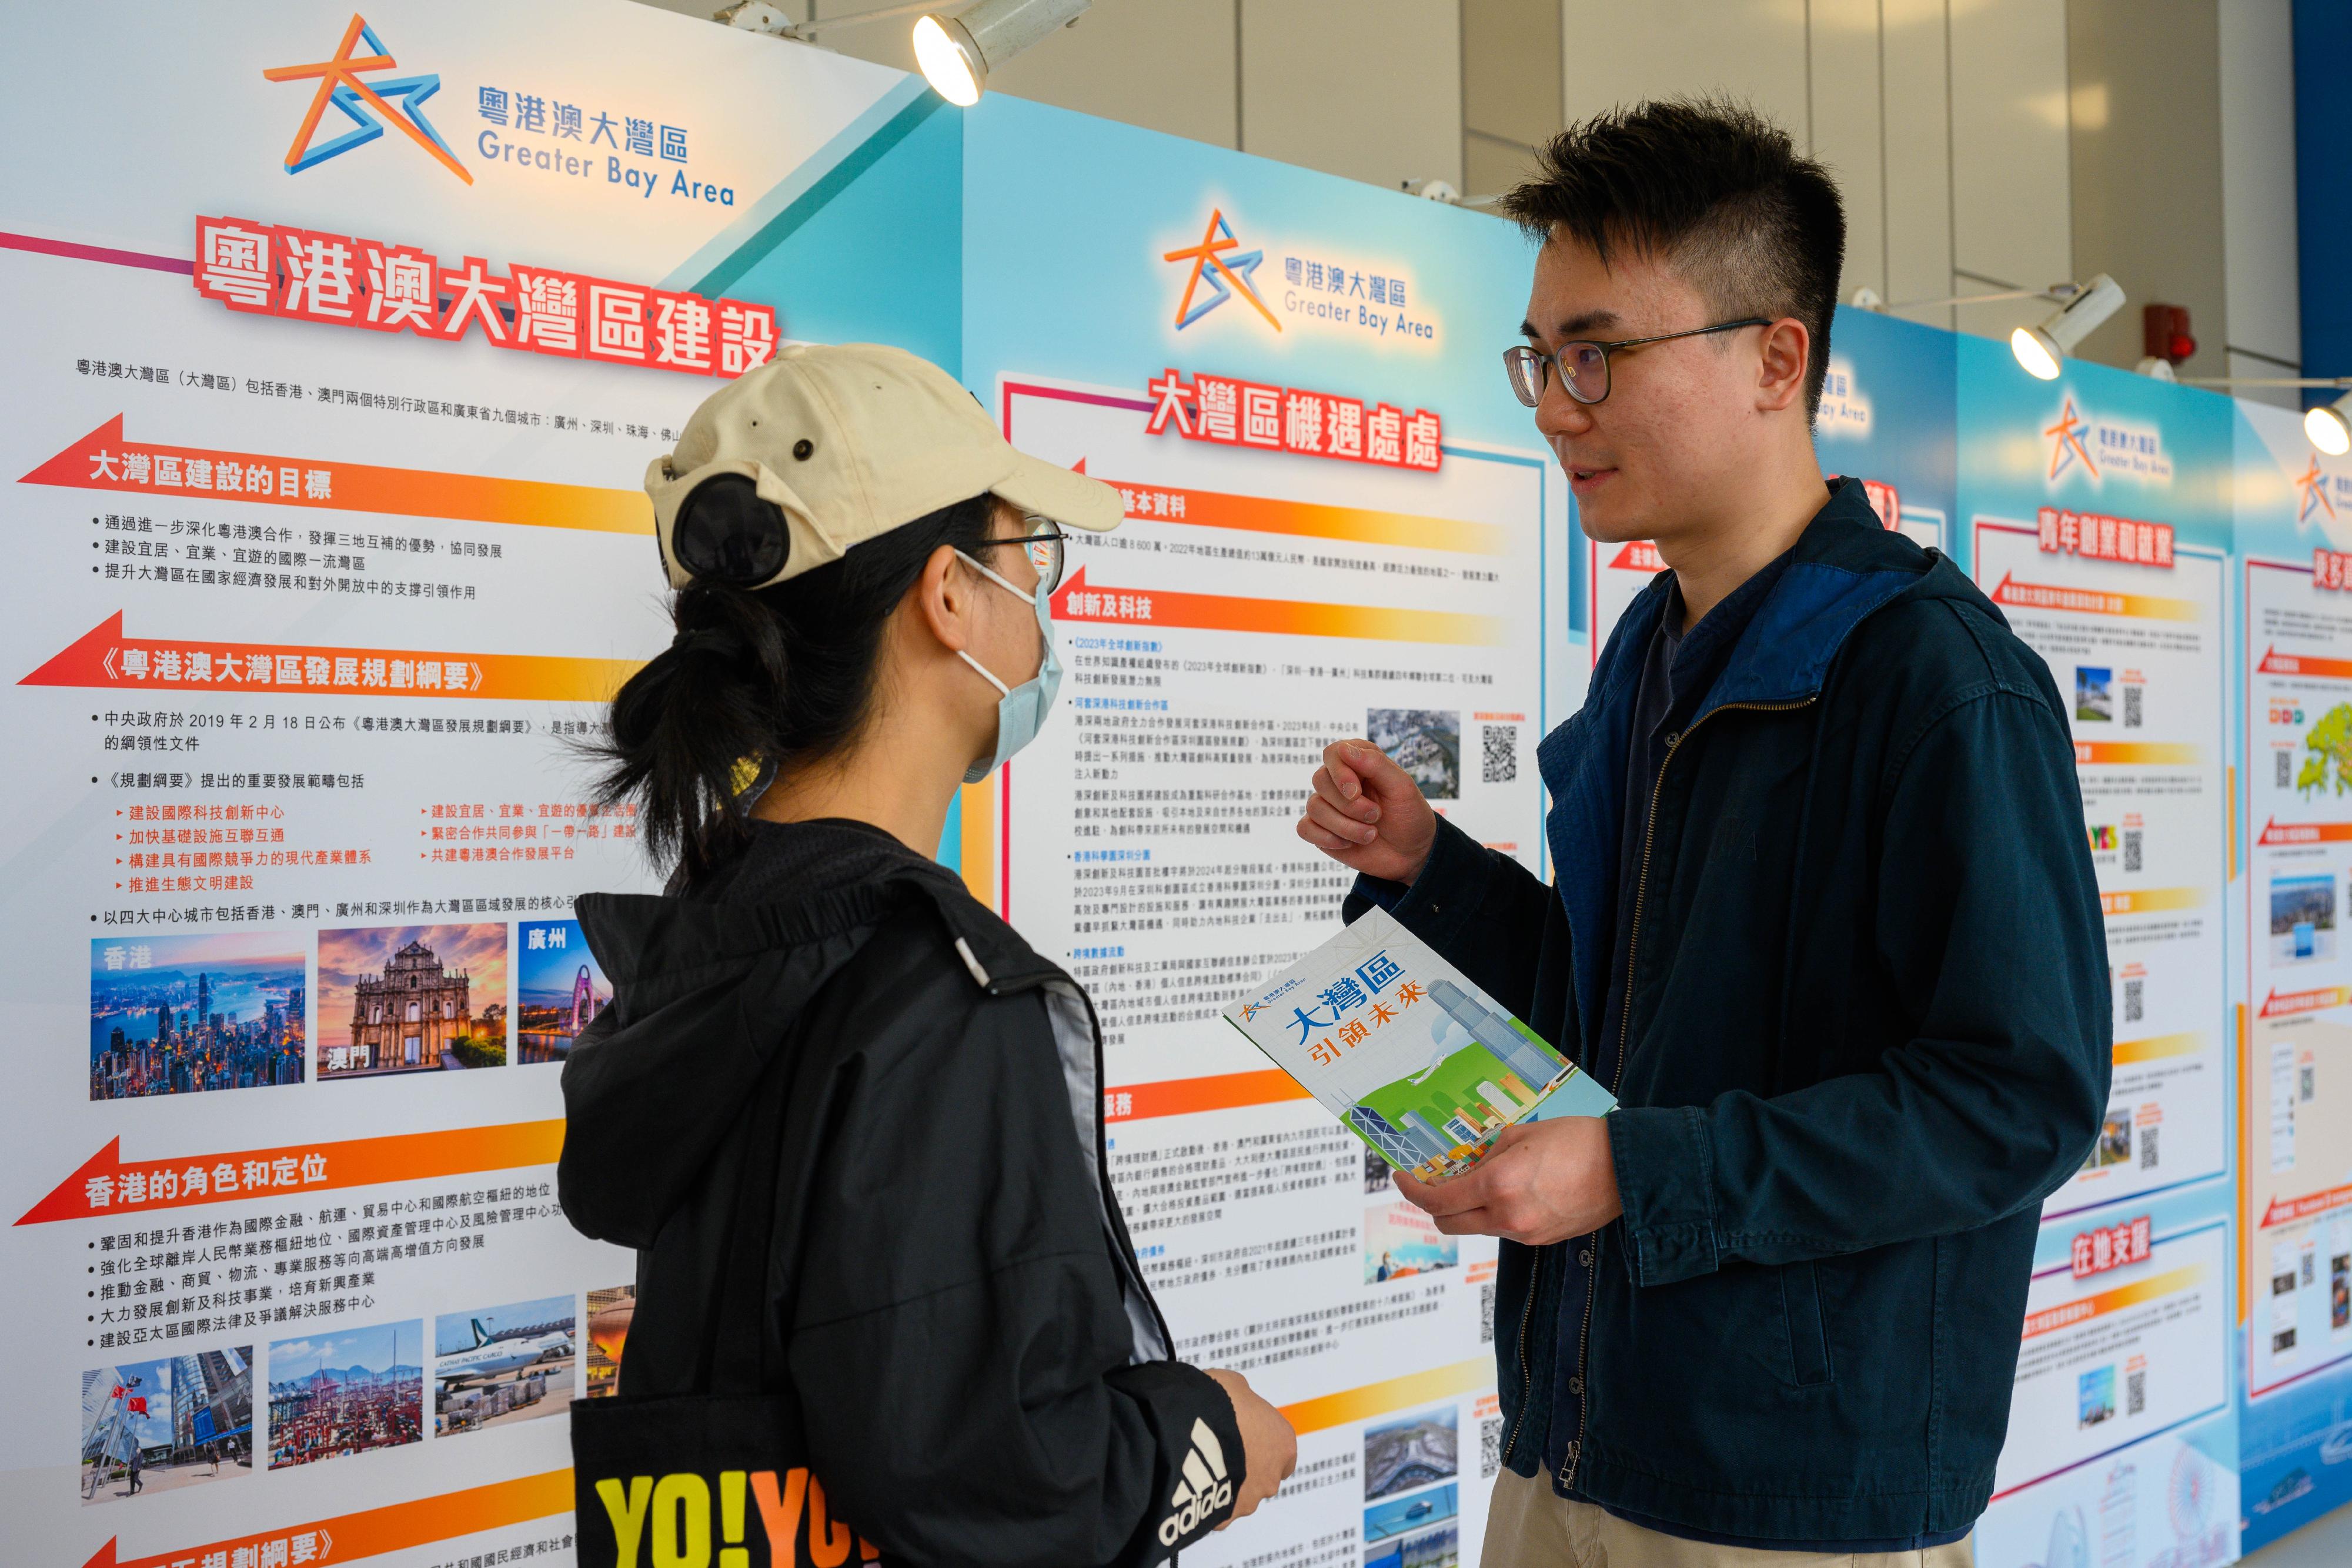 The Guangdong-Hong Kong-Macao Greater Bay Area Development Office is staging a roving exhibition at universities to showcase Greater Bay Area opportunities from today (January 17) until the end of March. Photo shows a university student visiting the Office's exhibition at Hong Kong Baptist University.